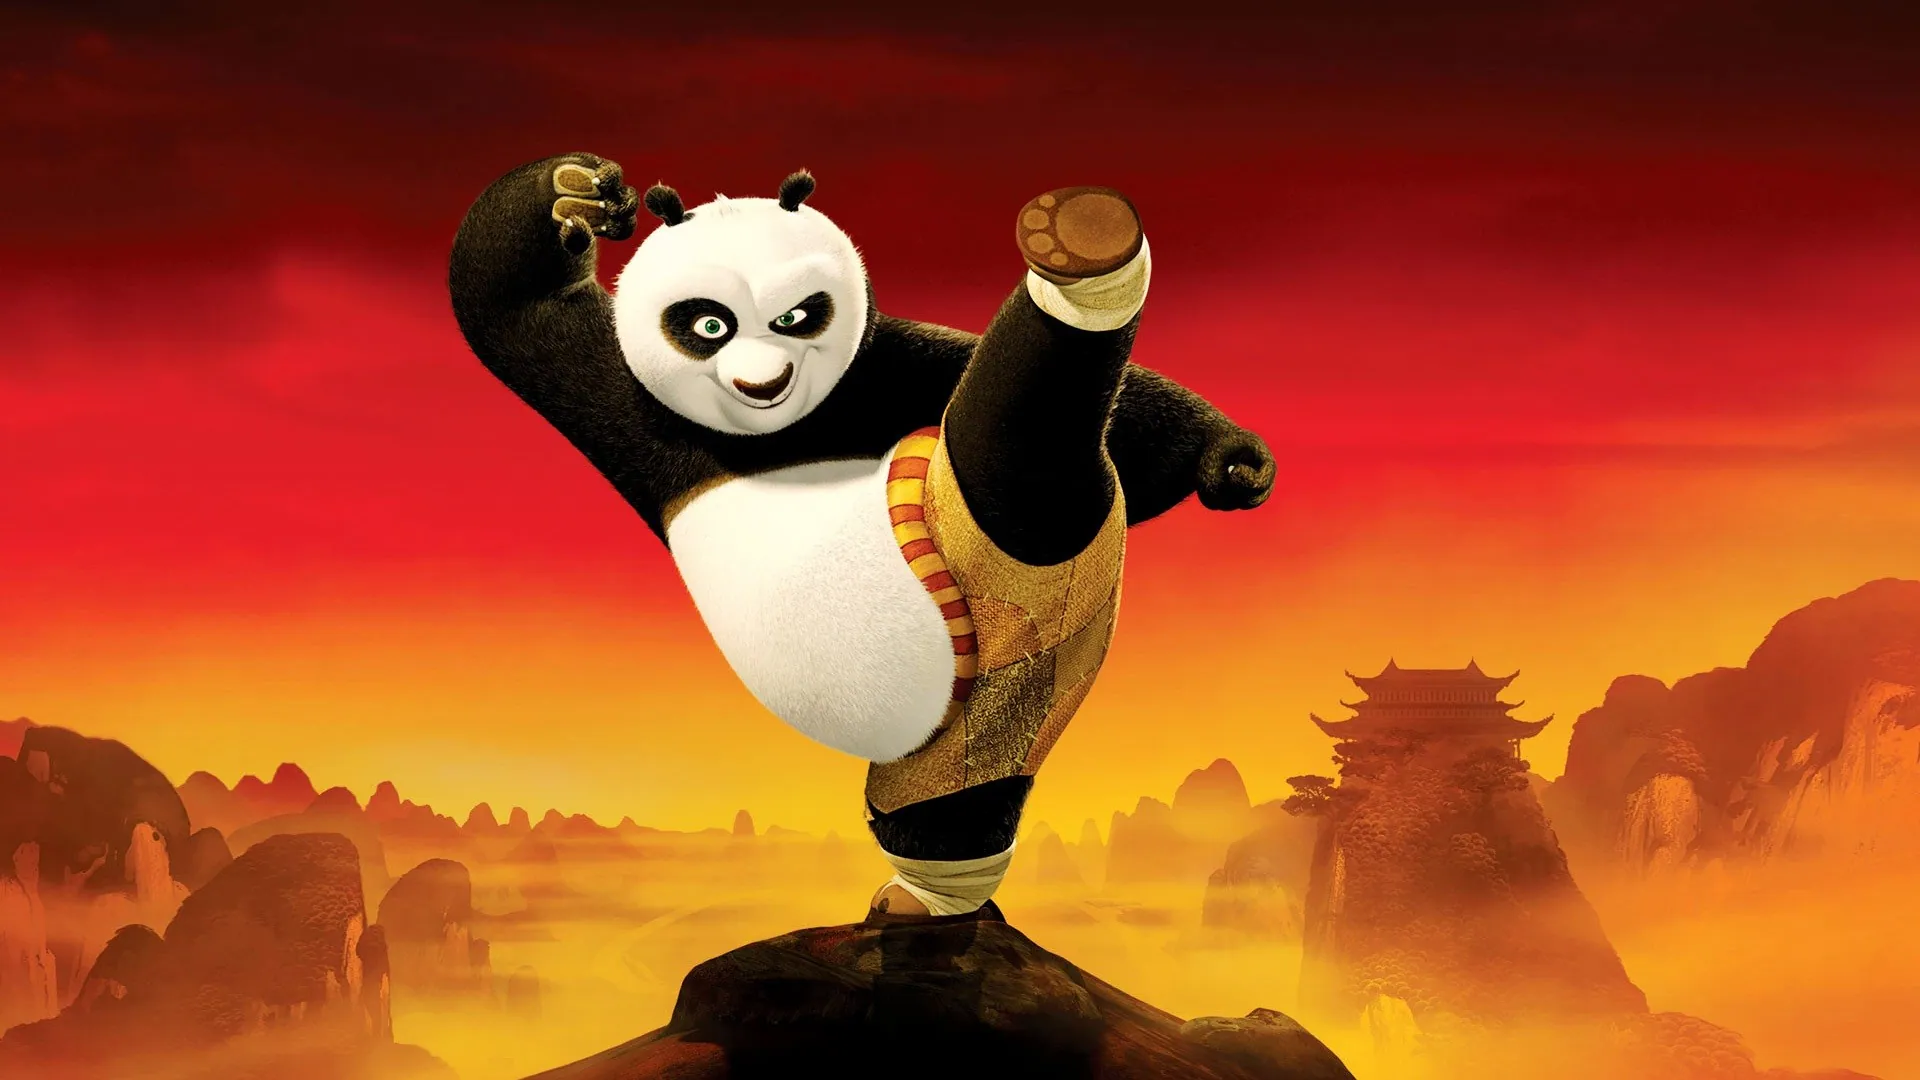 Where To Watch Kung Fu Panda 2 For Free Online? Best Drama